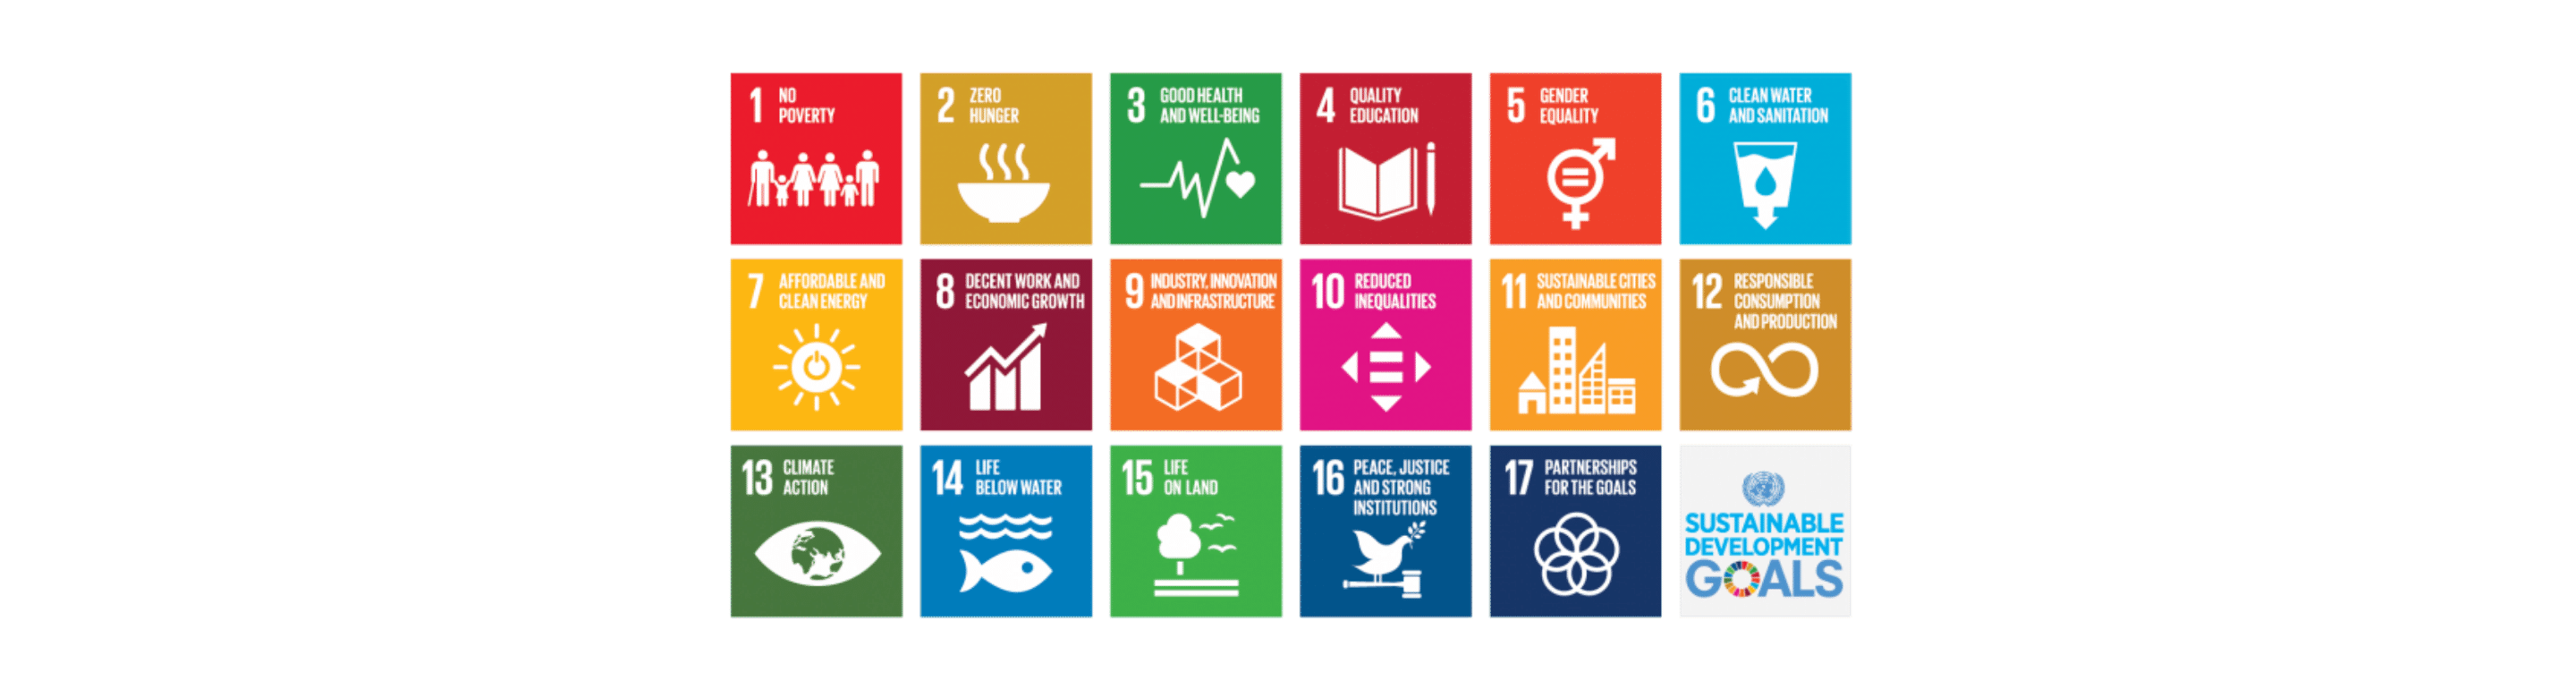 UN 2030 Sustainable Development Goals and cove.tool